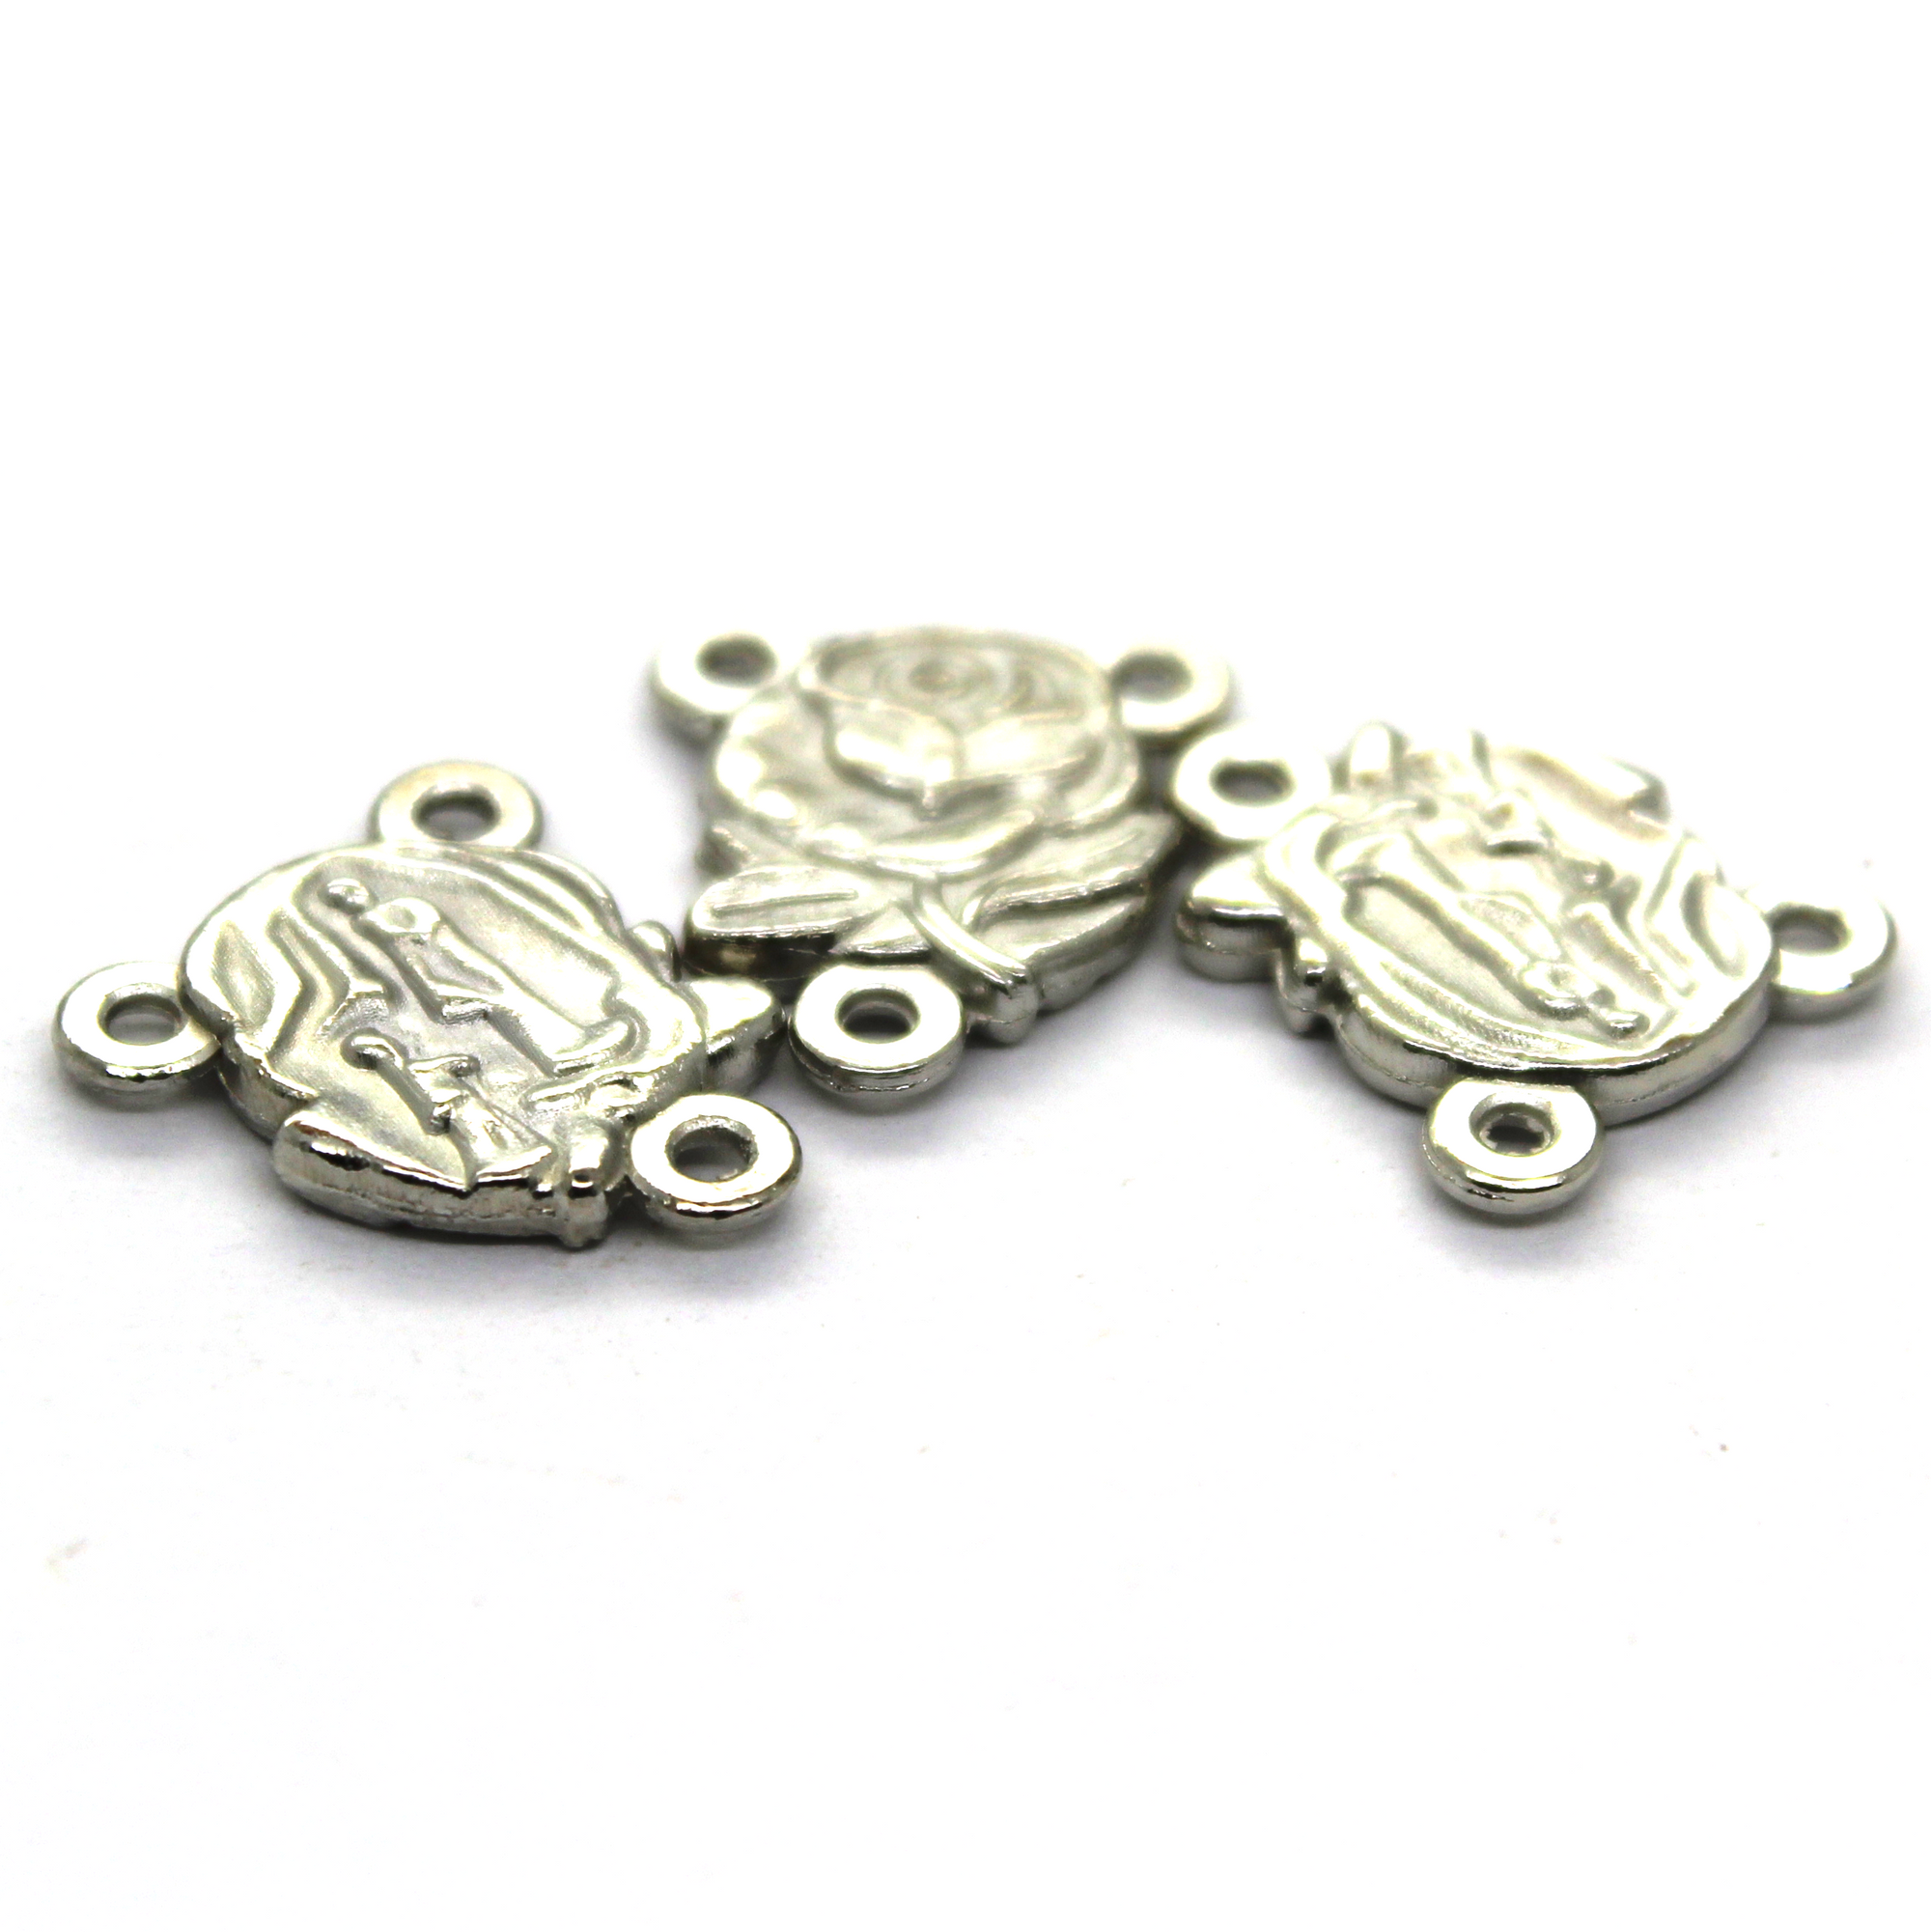 Charms, Rose Centerpiece, Silver, Alloy, 16.5mm x 14mm, Sold Per pkg 5